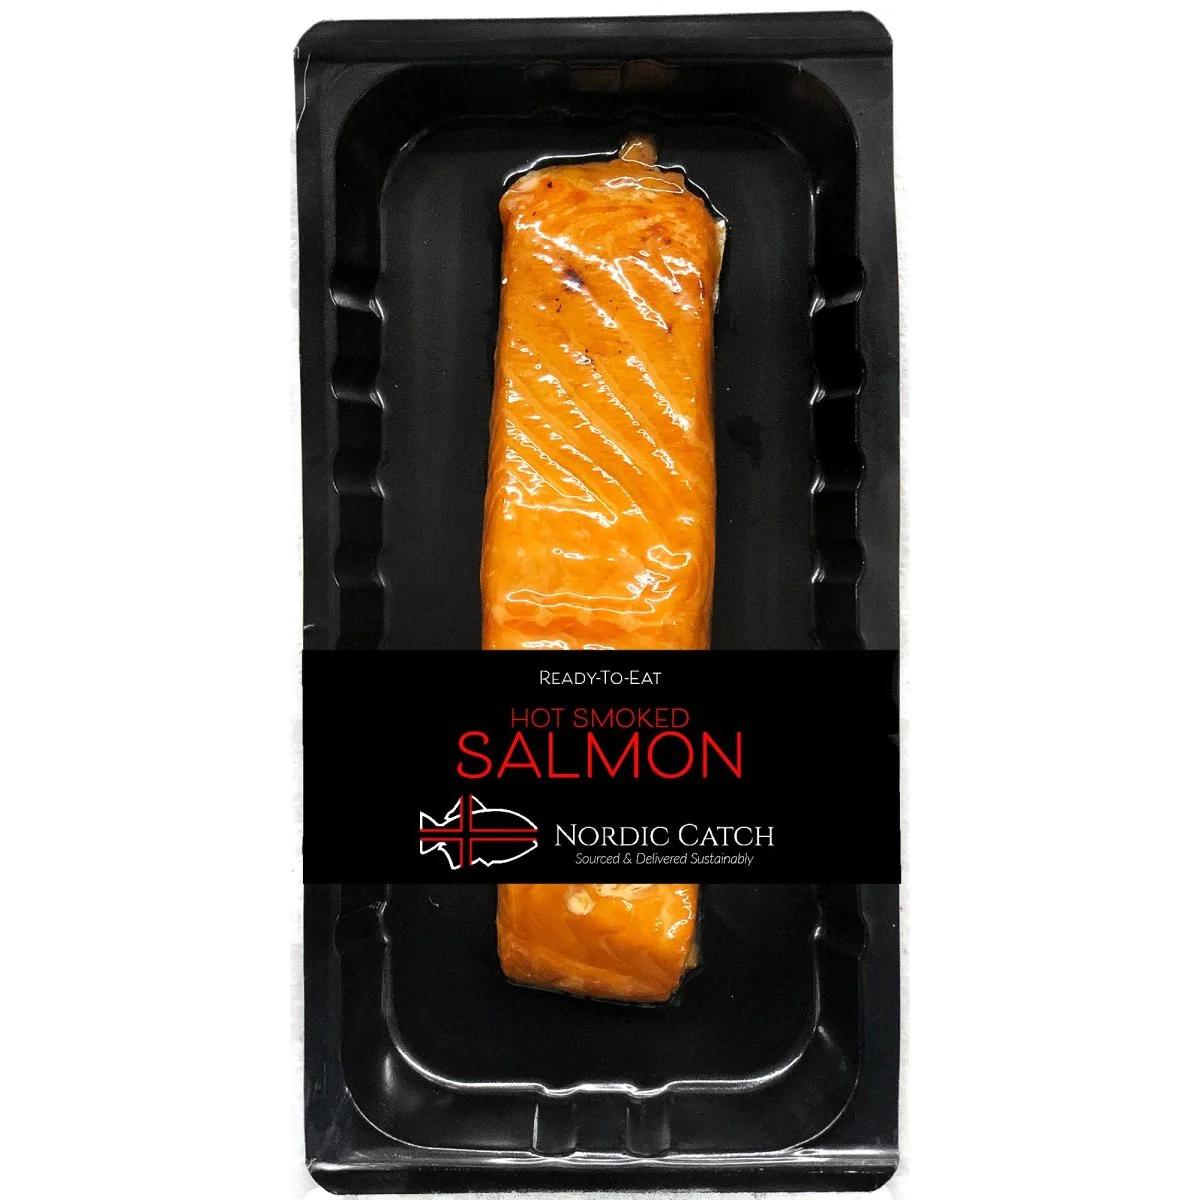 smoked salmon ready to eat - Can I heat up ready to eat salmon